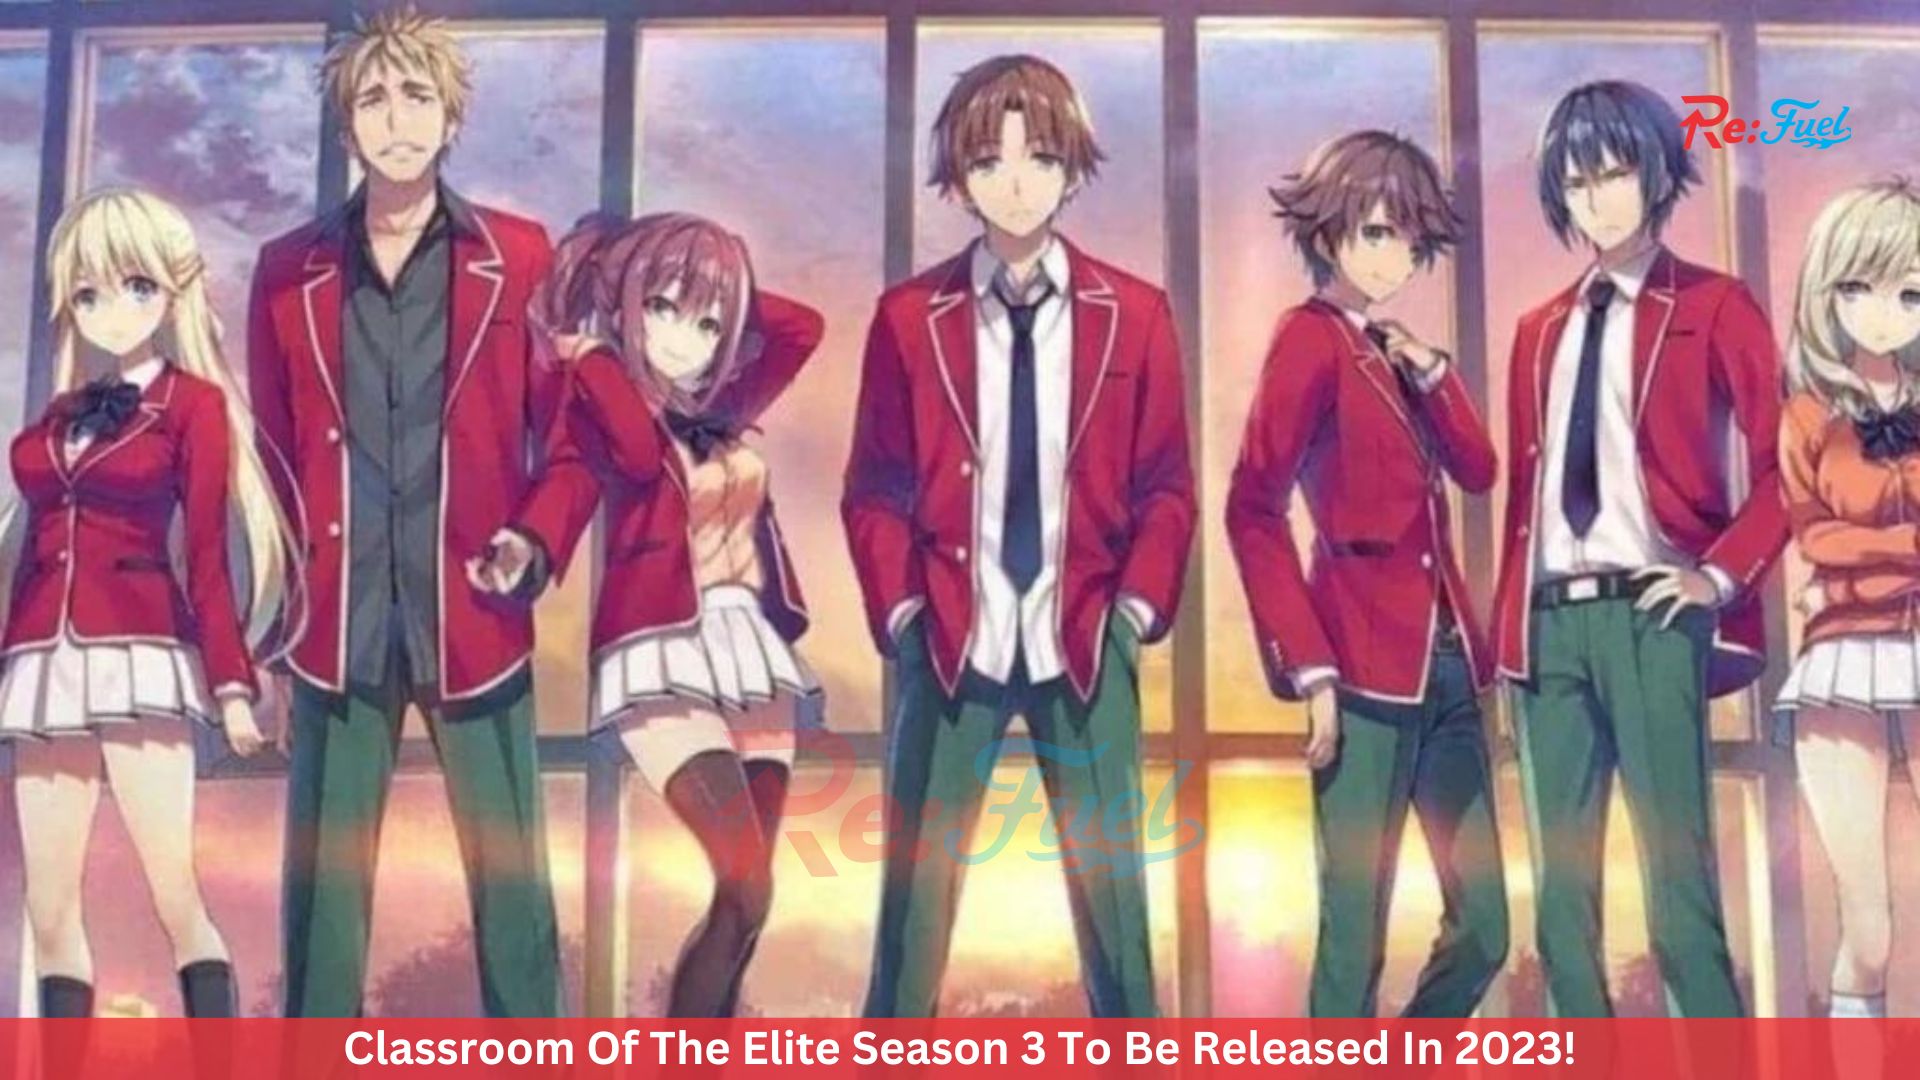 Classroom Of The Elite Season 3 To Be Released In 2023!